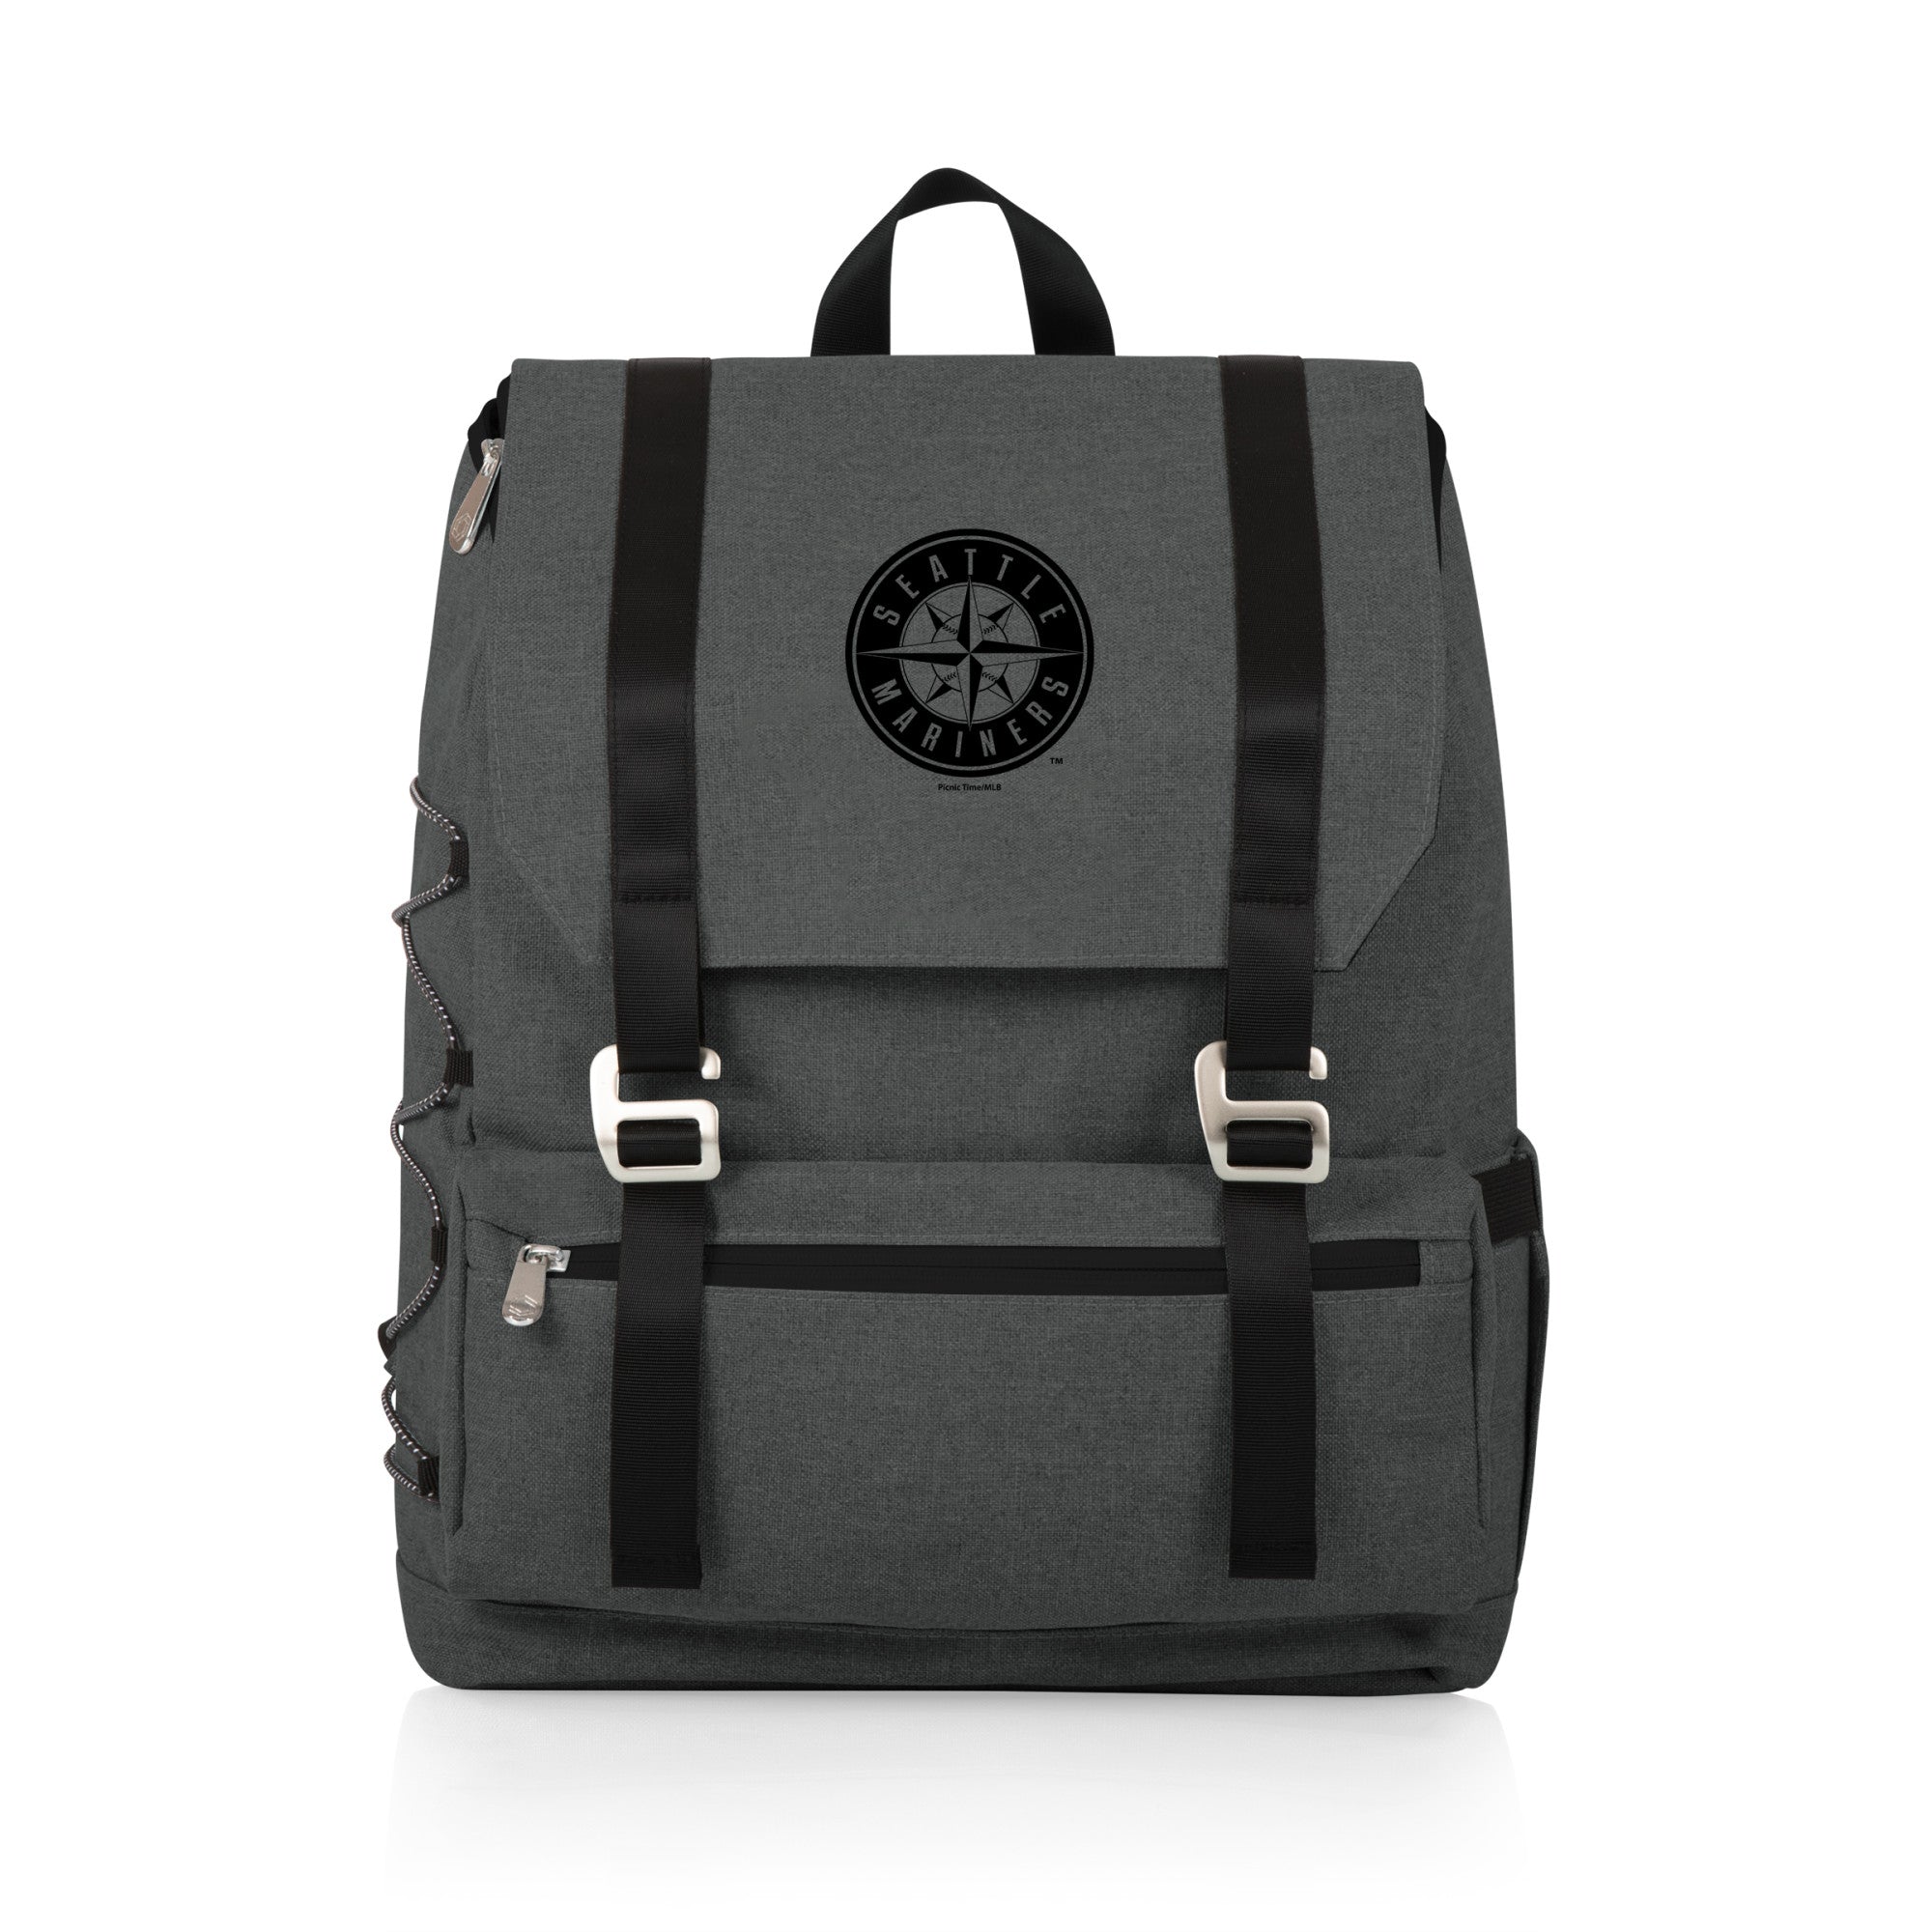 Seattle Mariners - On The Go Traverse Backpack Cooler